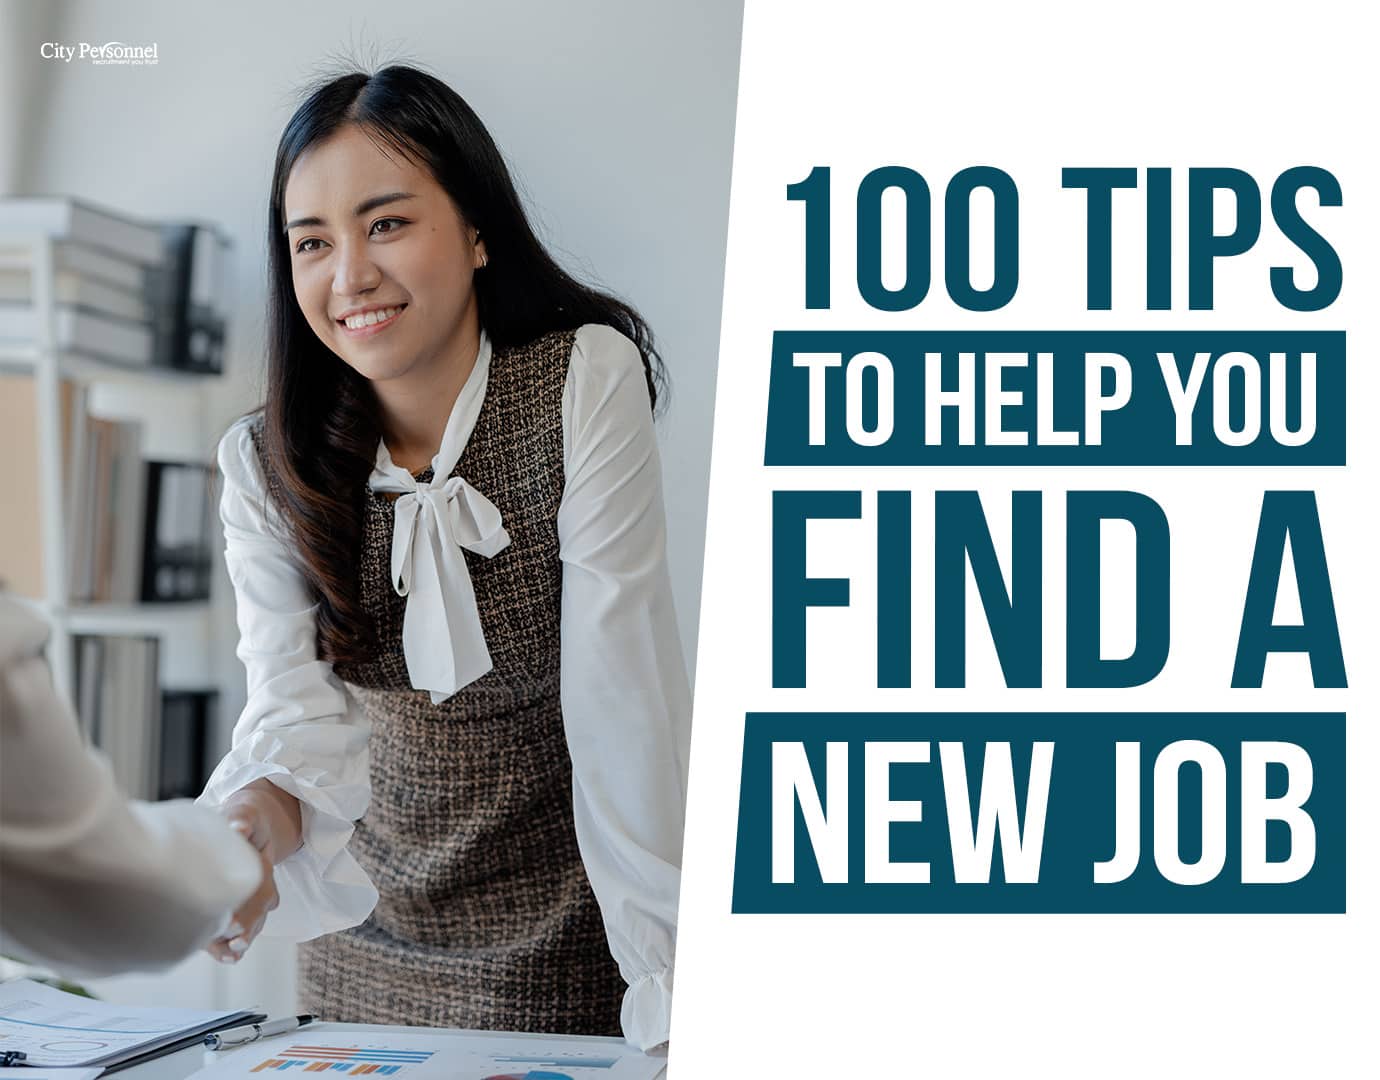 100 tips to help you find a new job